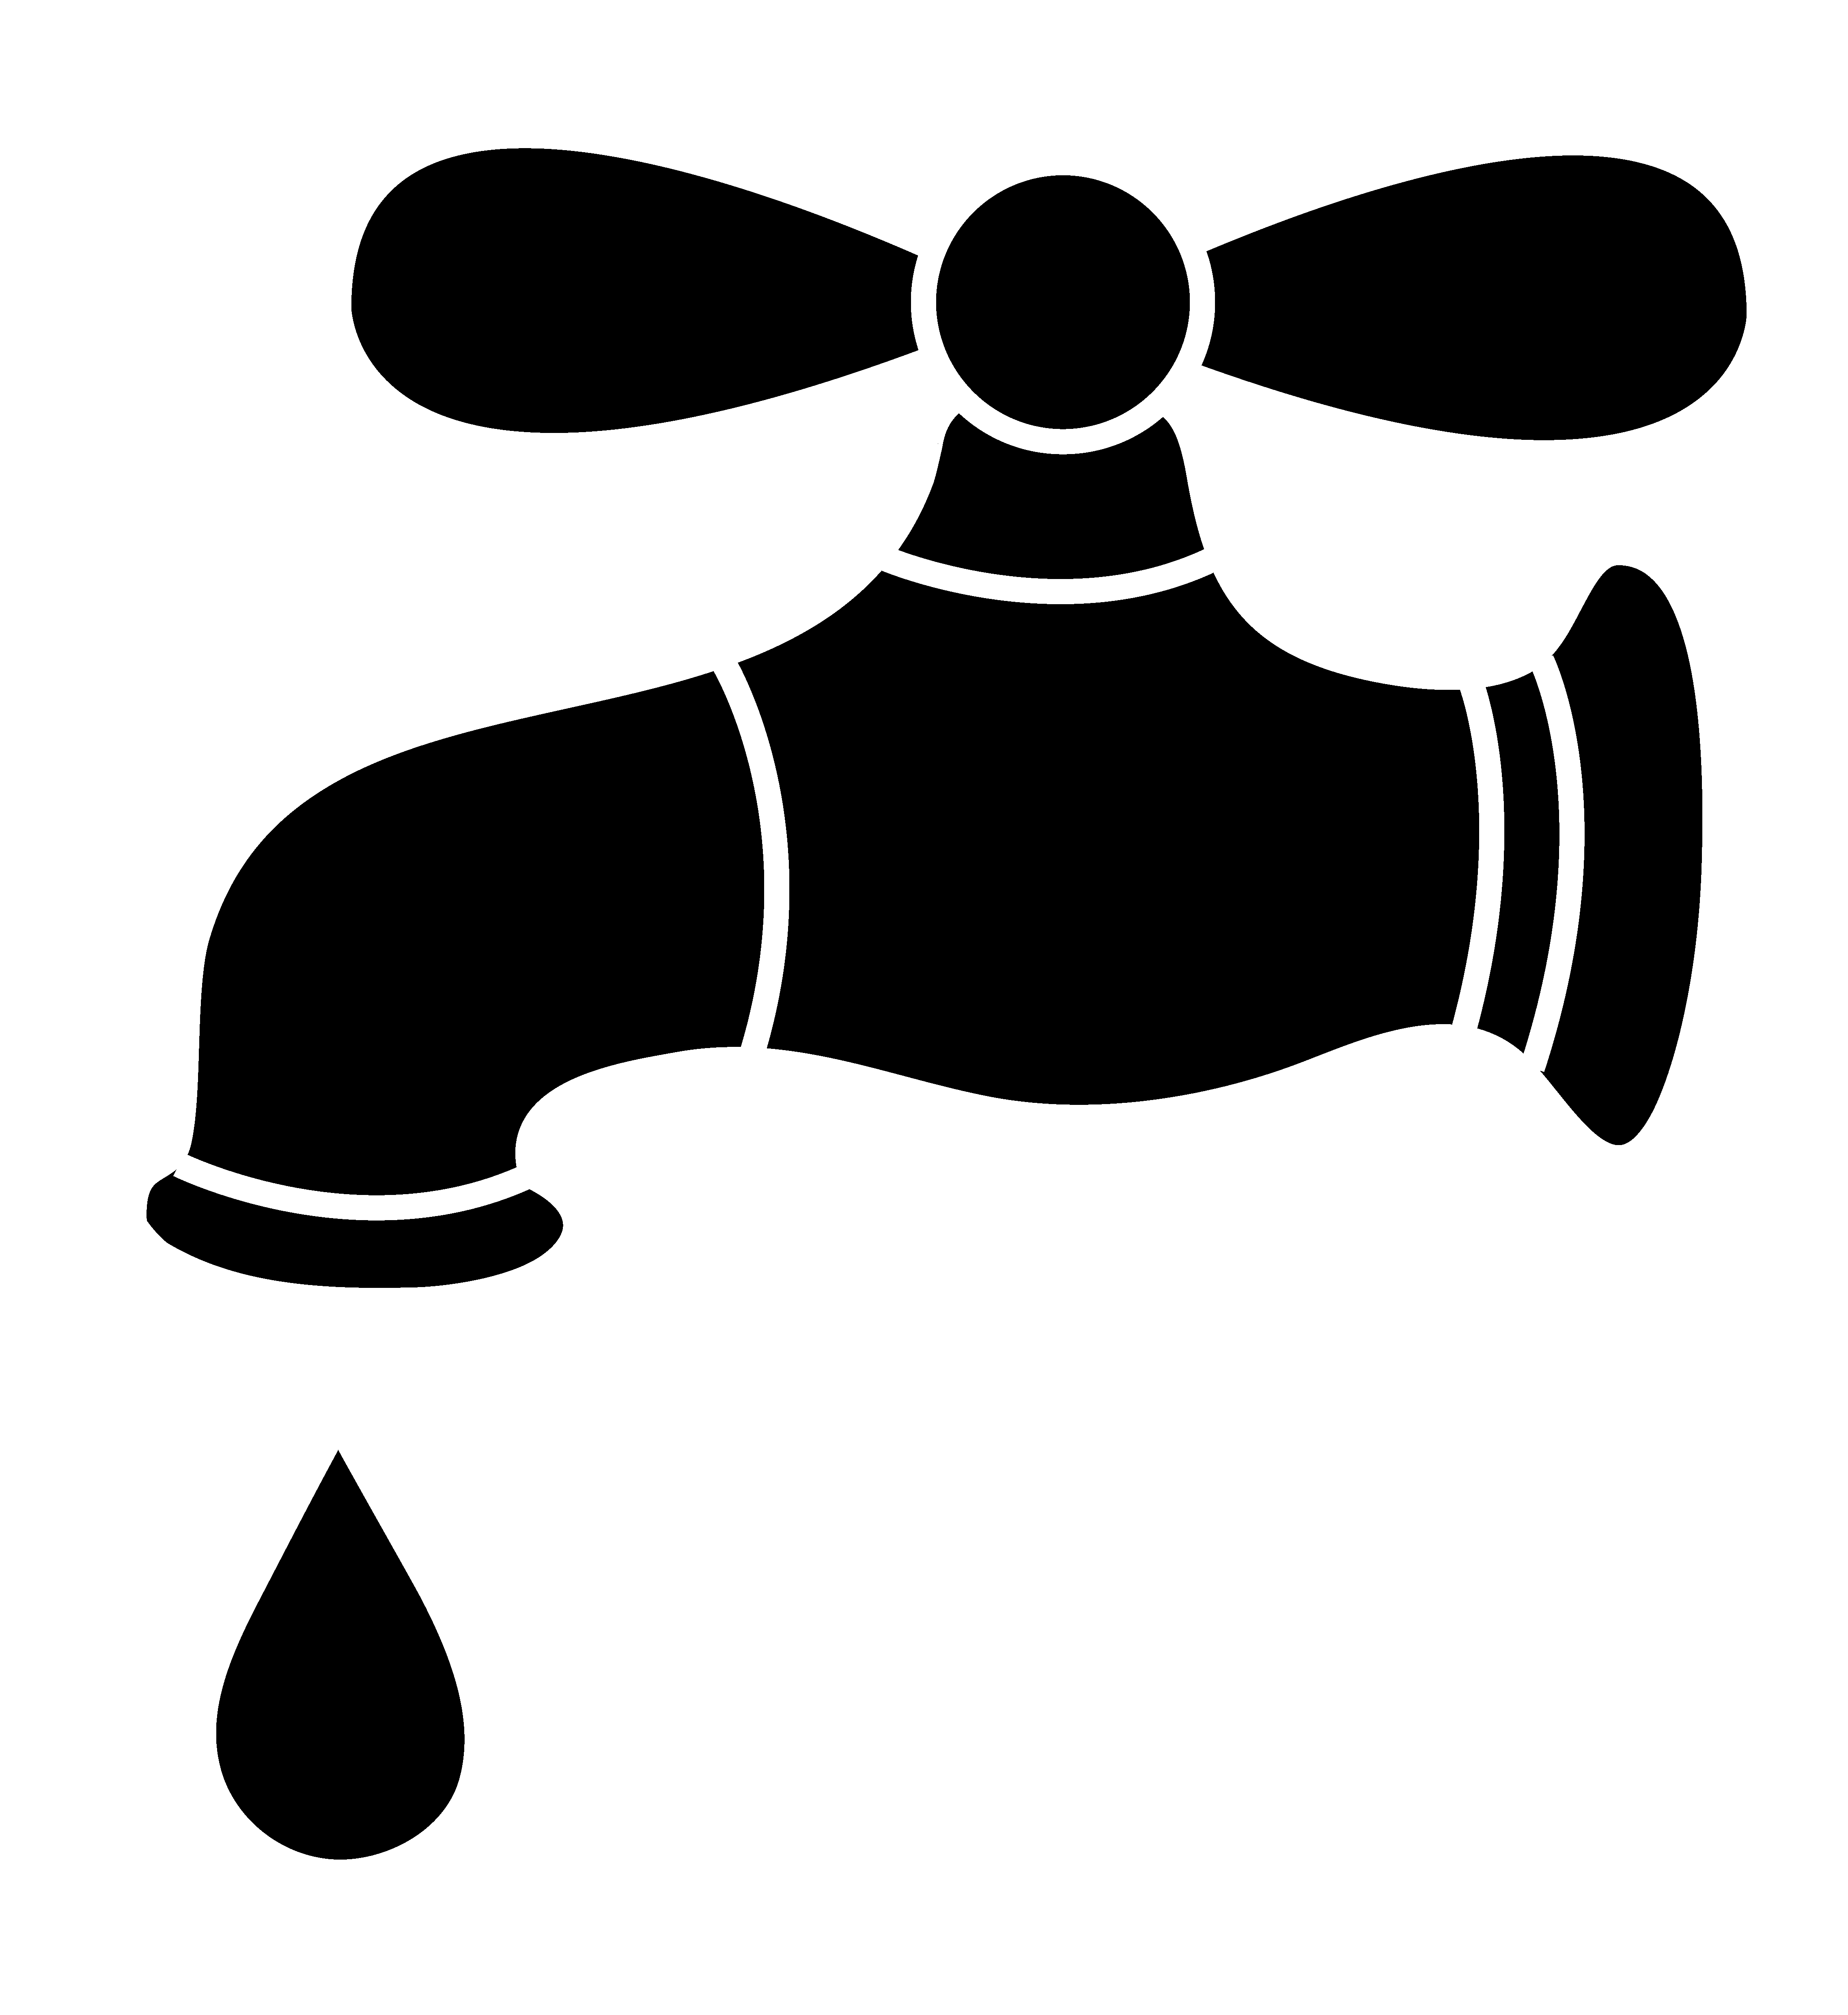 Clipart of a water fucet.